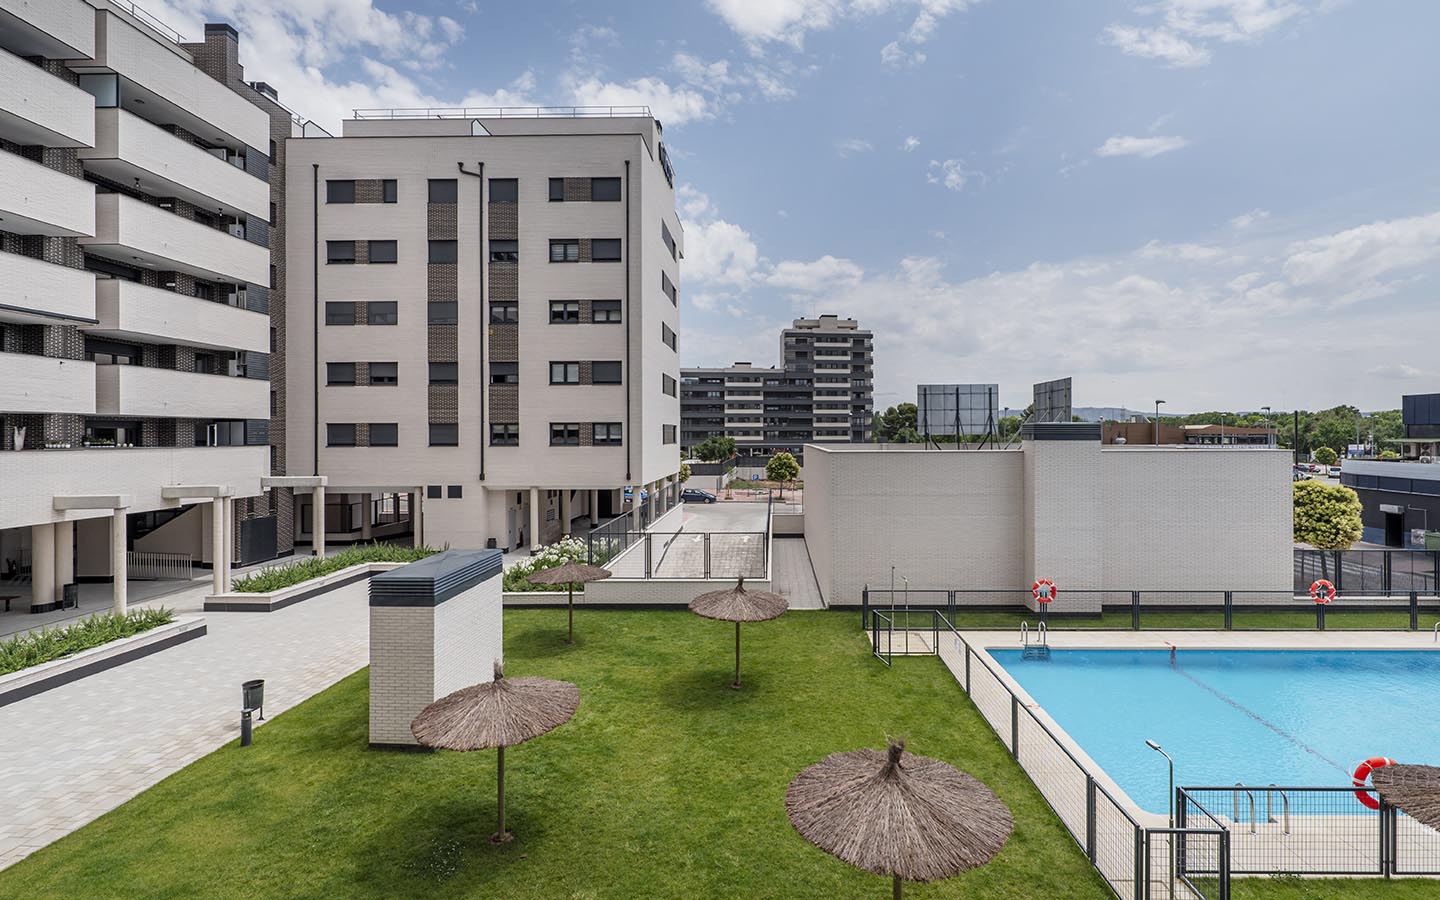 Swimming pool available as an amenity in apartments